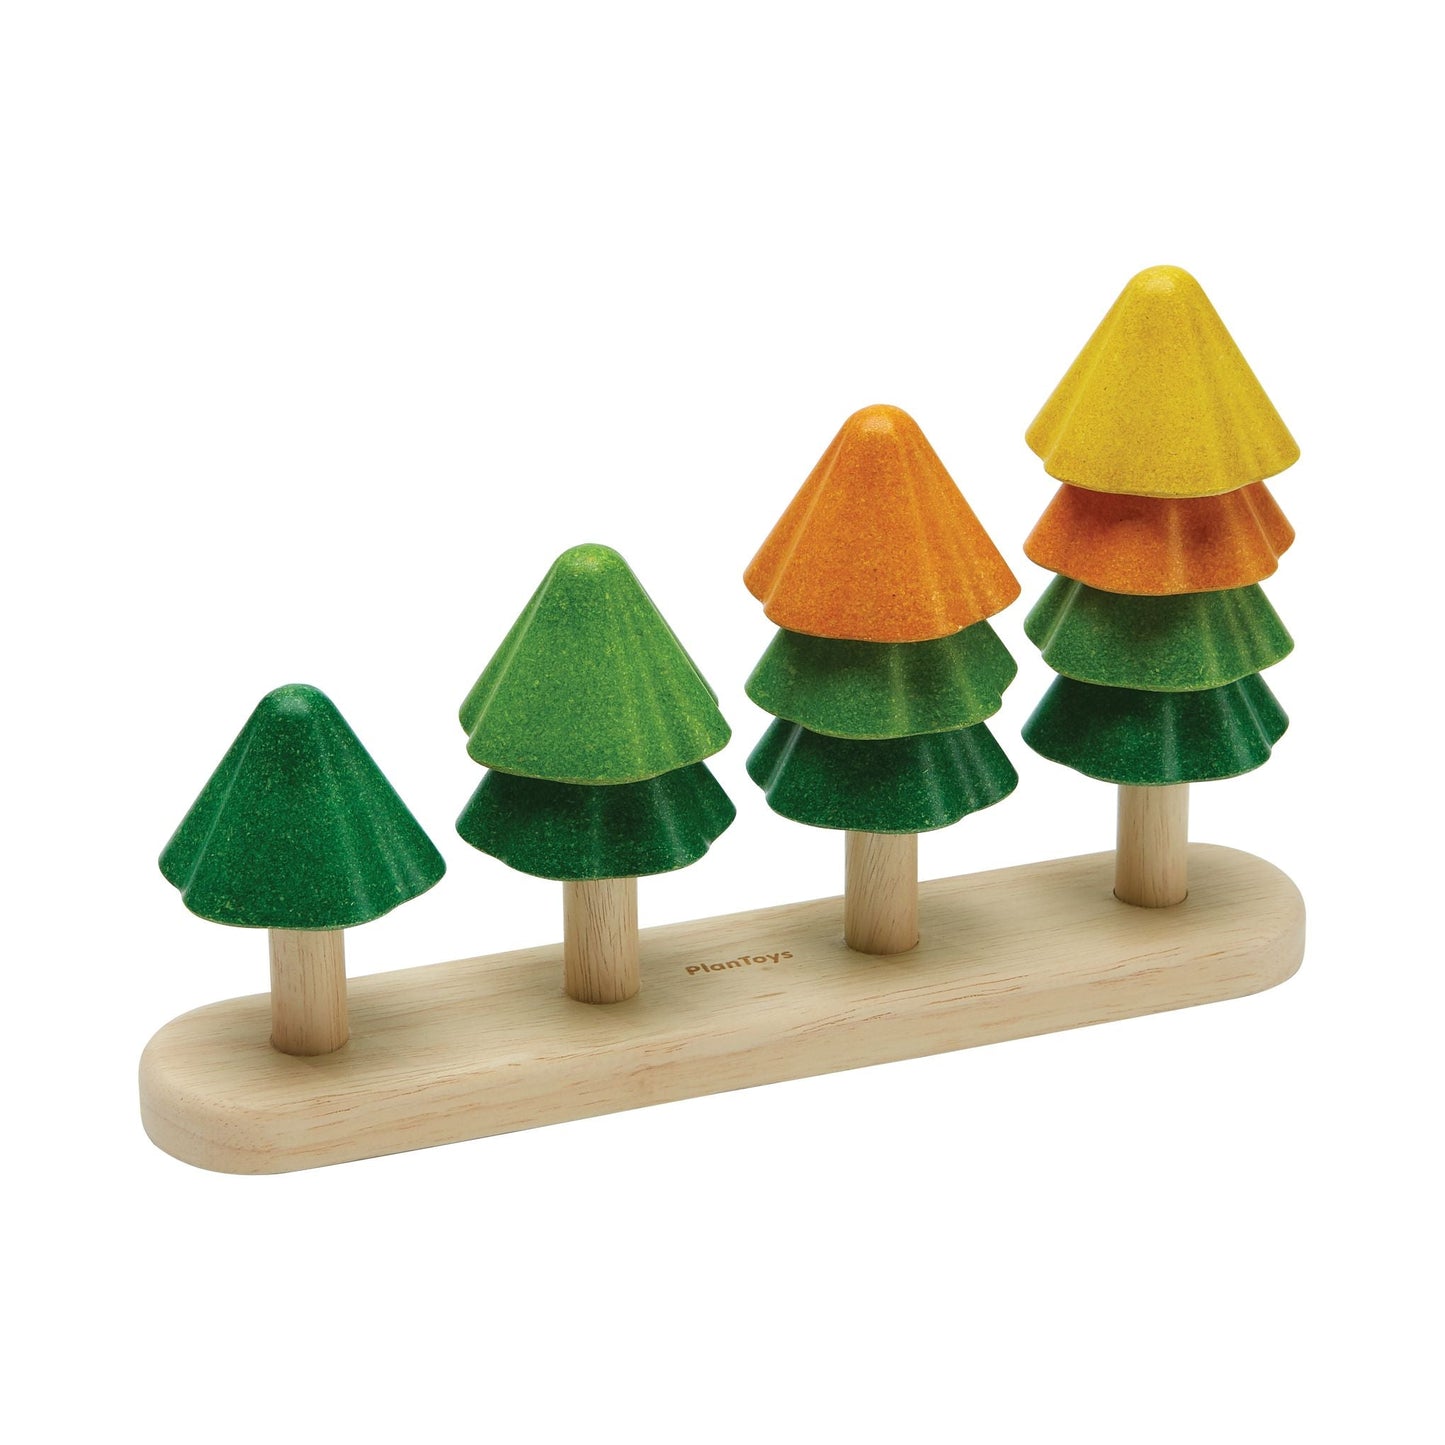 The board with four sort and count trees with the lowest tree from left to right. The first tree is dark green only the second has dark and pale green while the third has dark green, pale green and orange. The fourth tree is dark green at the bottom, pale green next then orange and finishing with yellow on top.